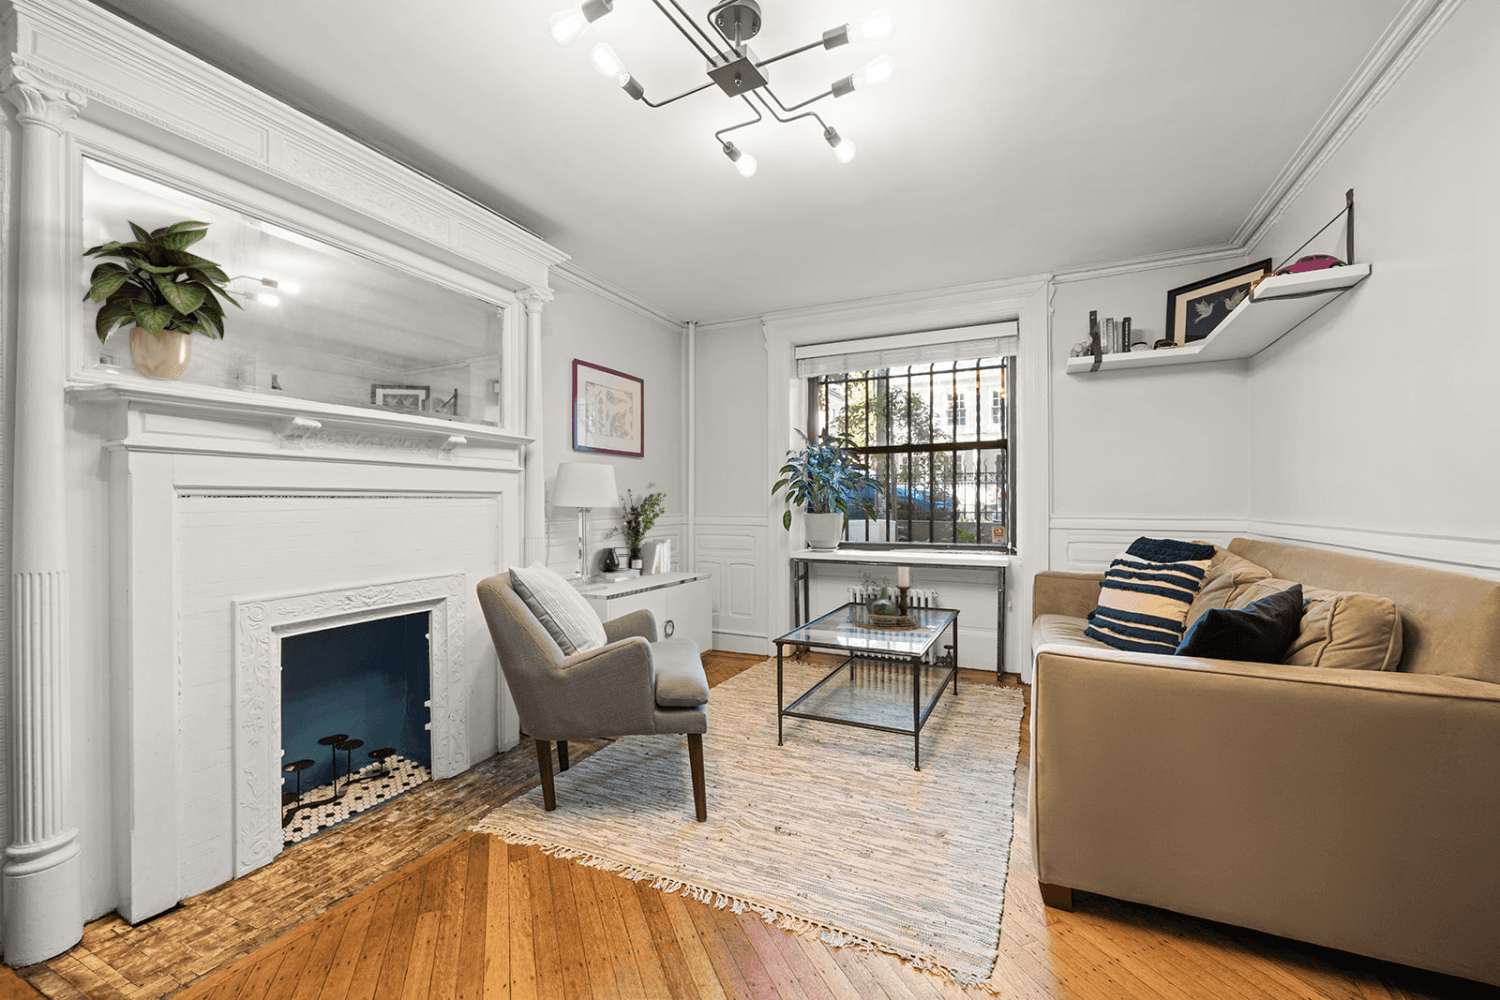 Welcome to 200 St. James Place, nestled on a serene tree lined street in the heart of Clinton Hill.